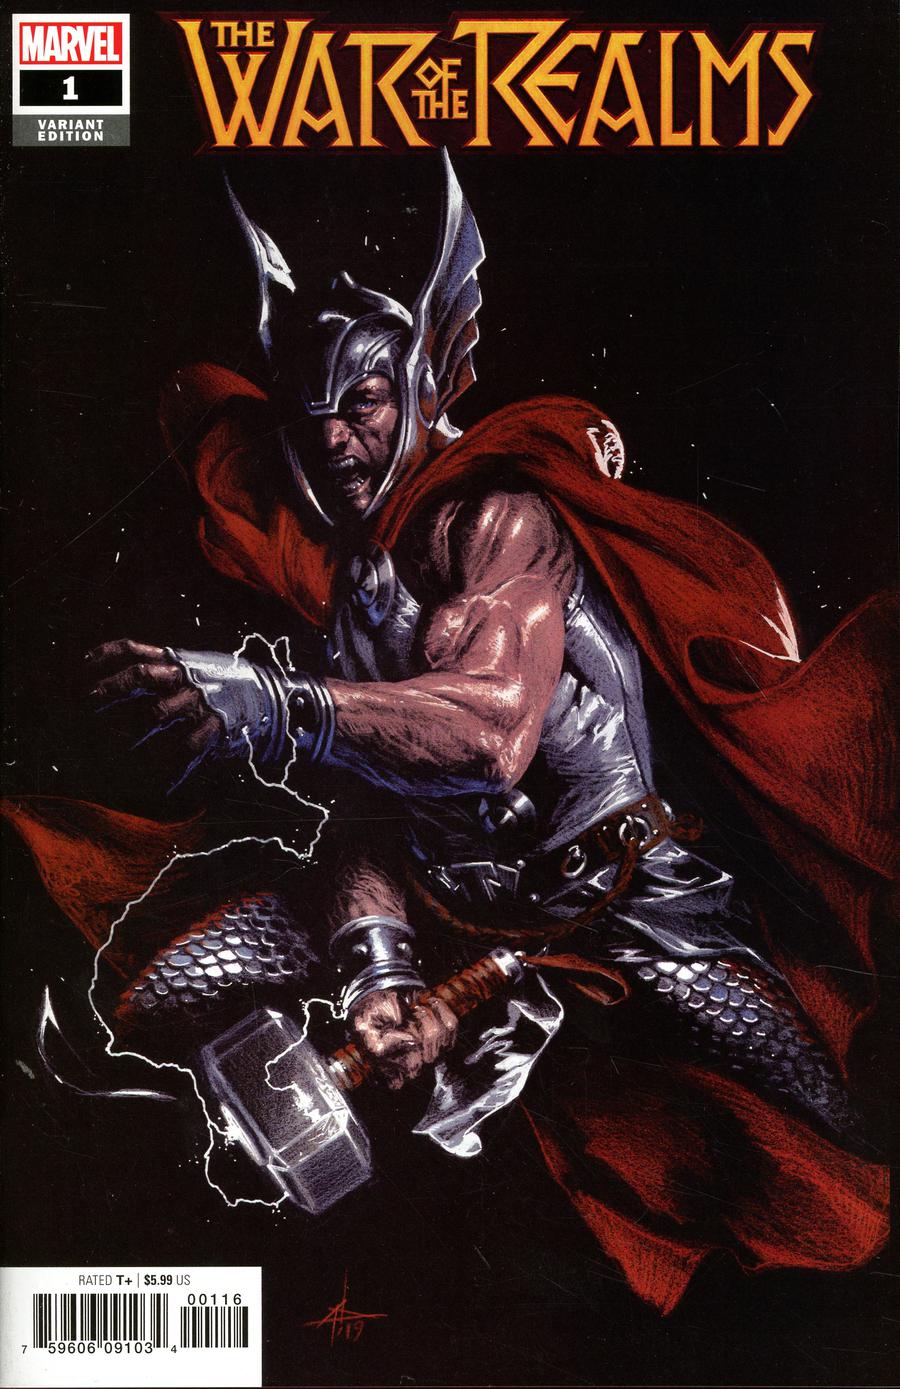 Thor Classic Trade Variant issue #5 Limited to only 700 copies Dell/'Otto